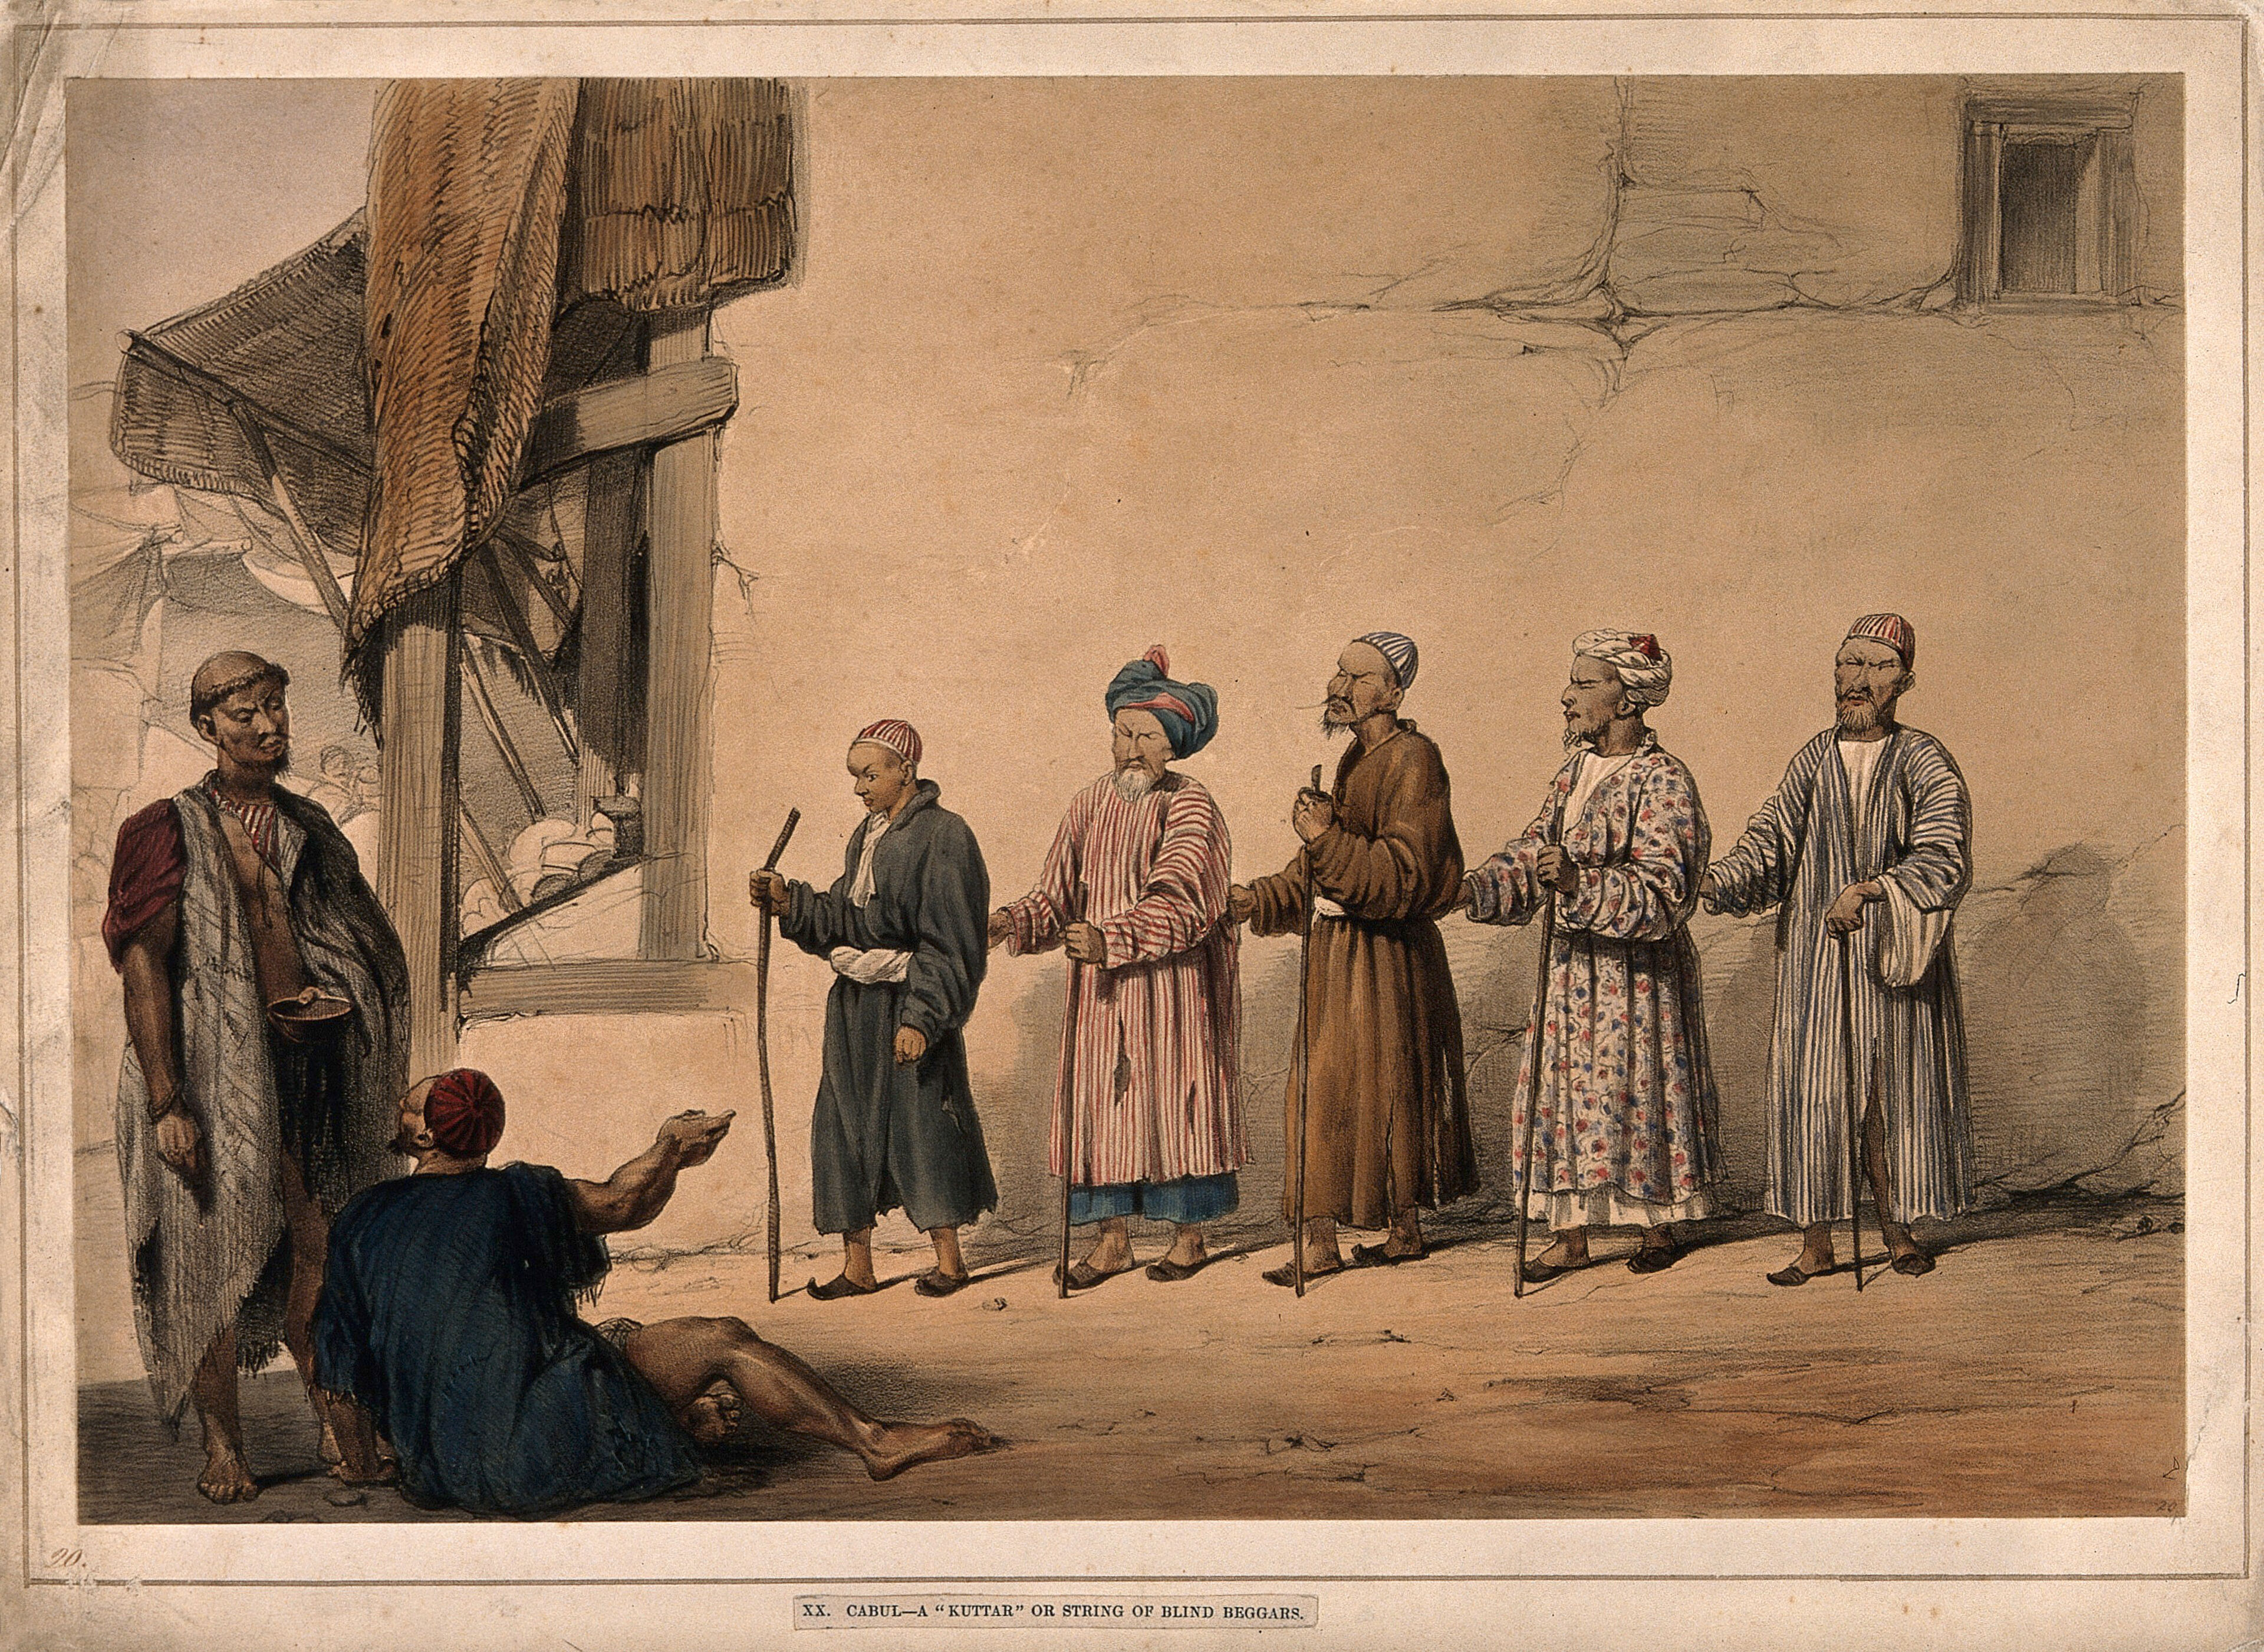 A 'kuttar' or line of blind beggars in a row, two other men in discussion, Kabul, Afghanistan. Coloured lithograph after L.W. Hart, 1843.